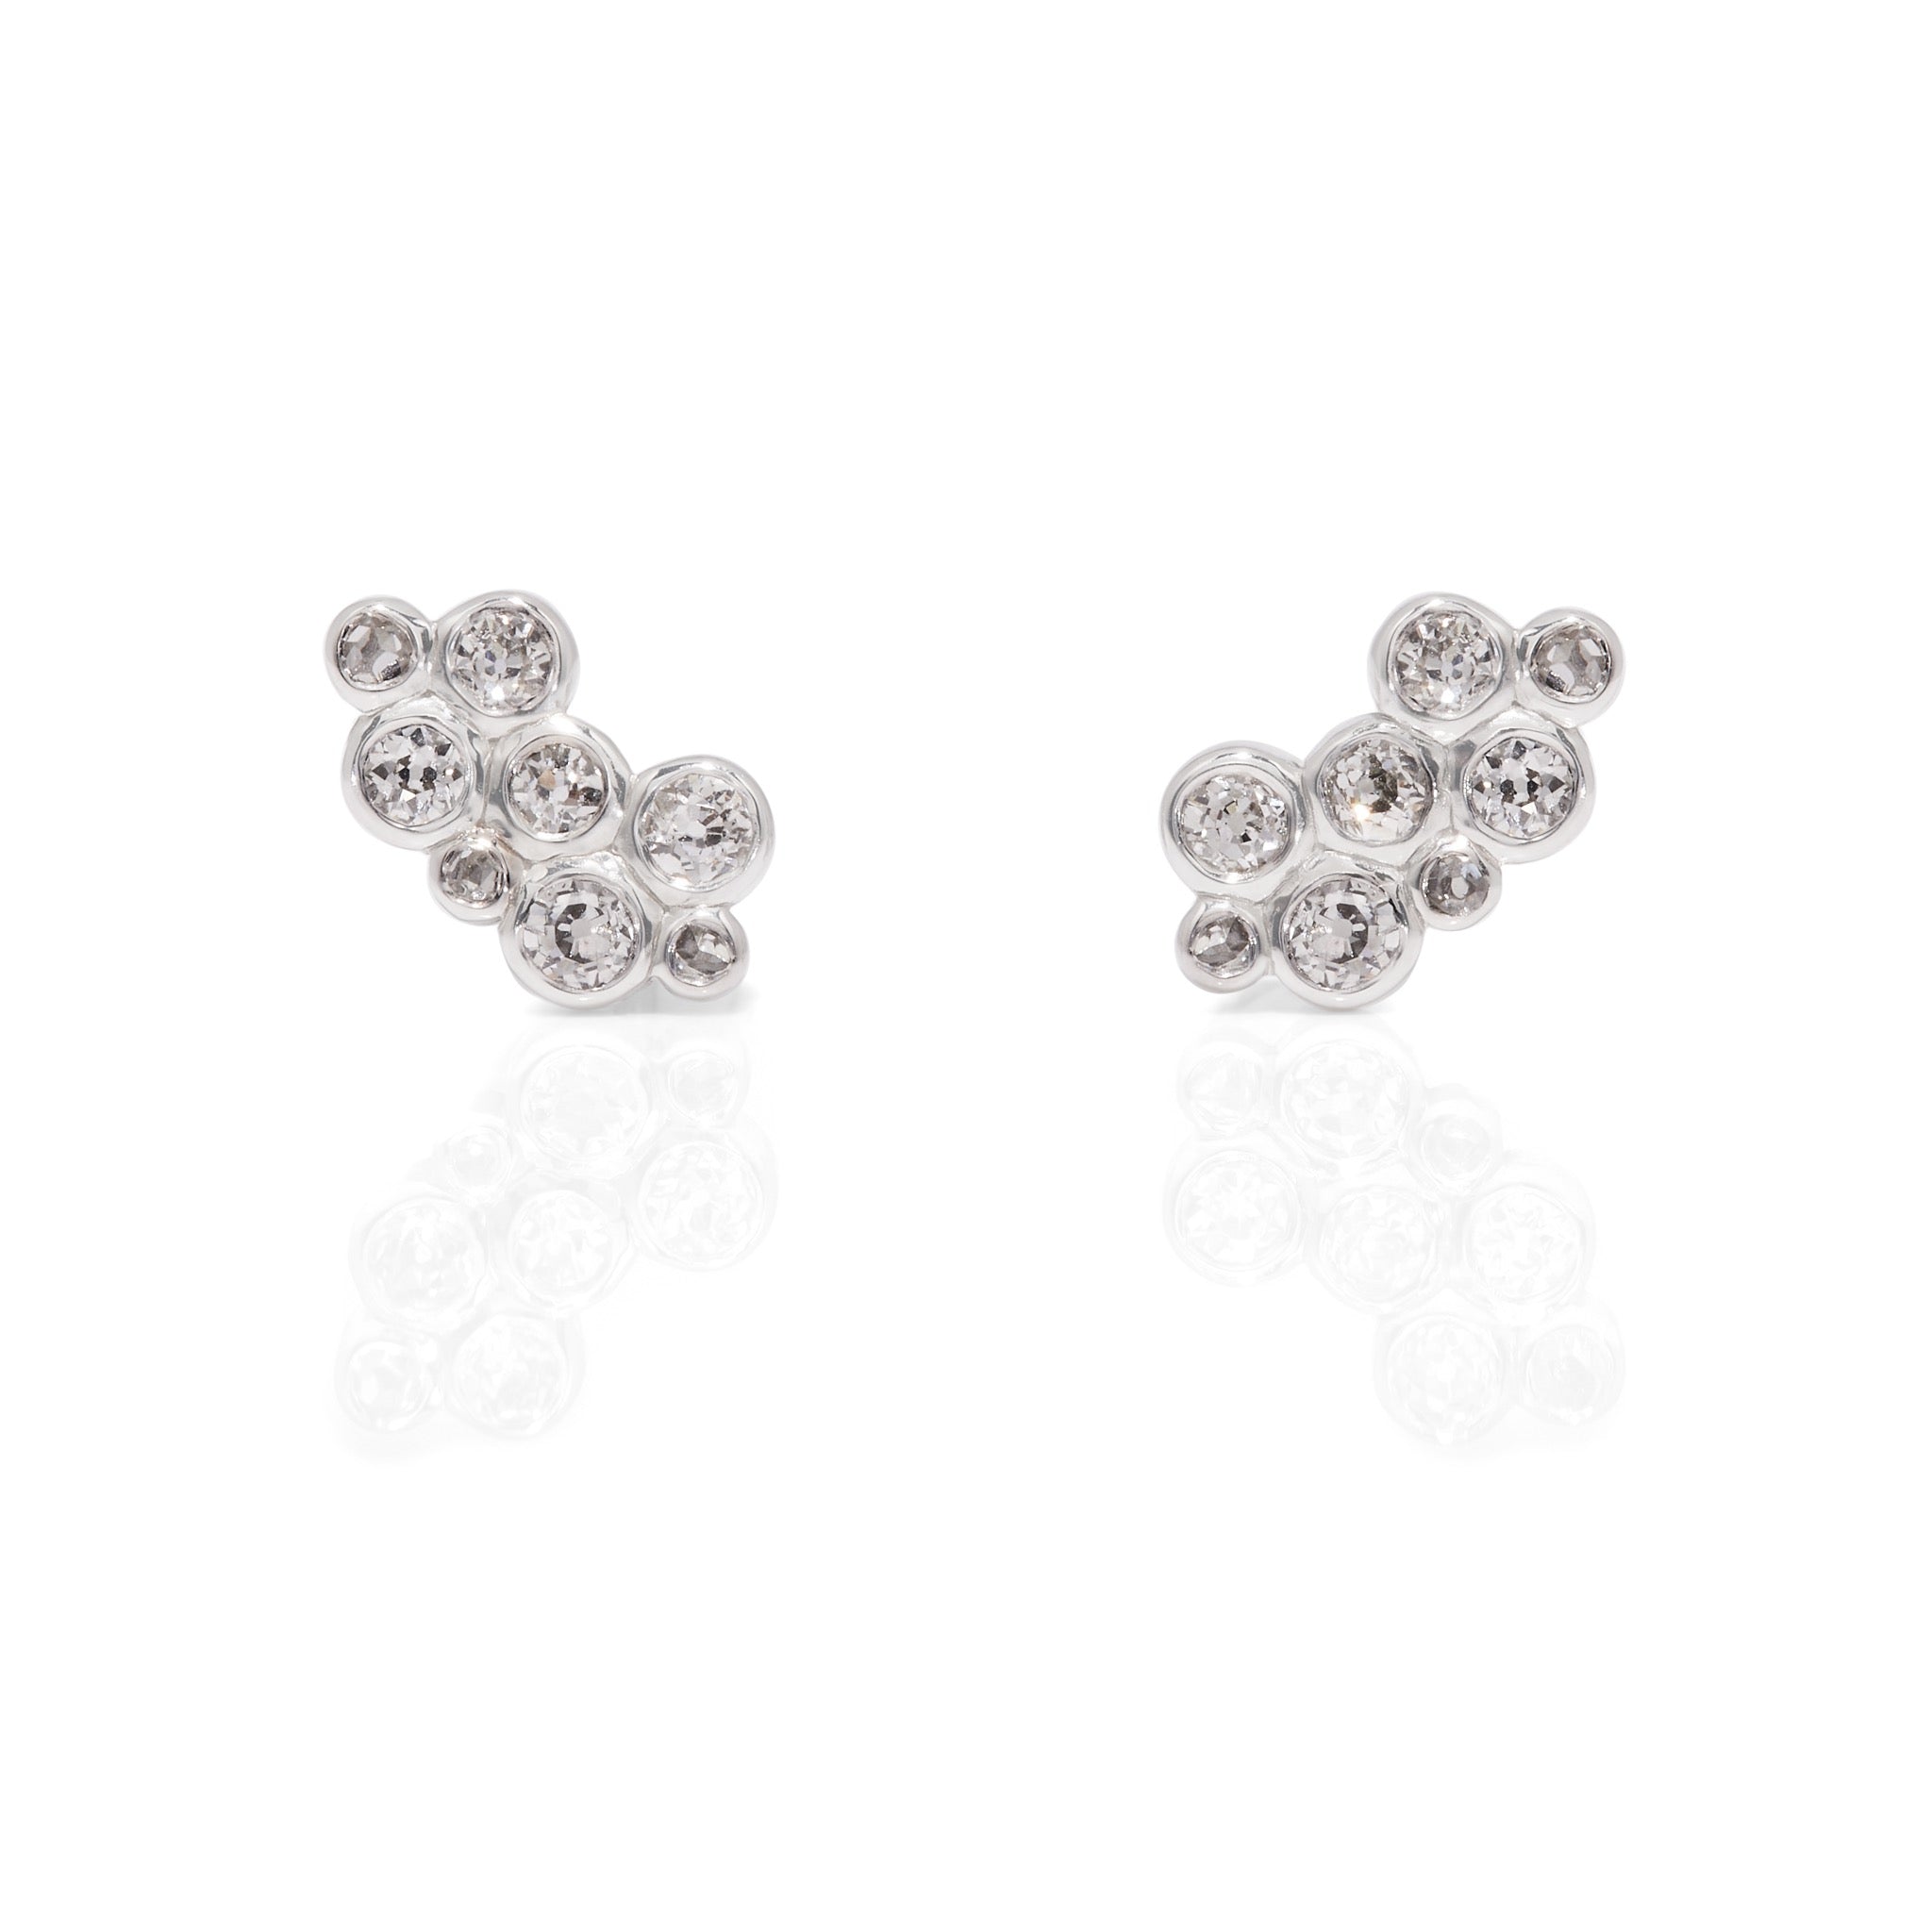 Redesigned from a family heirloom a pair of diamond bezel set wing studs lying on white background with shadow